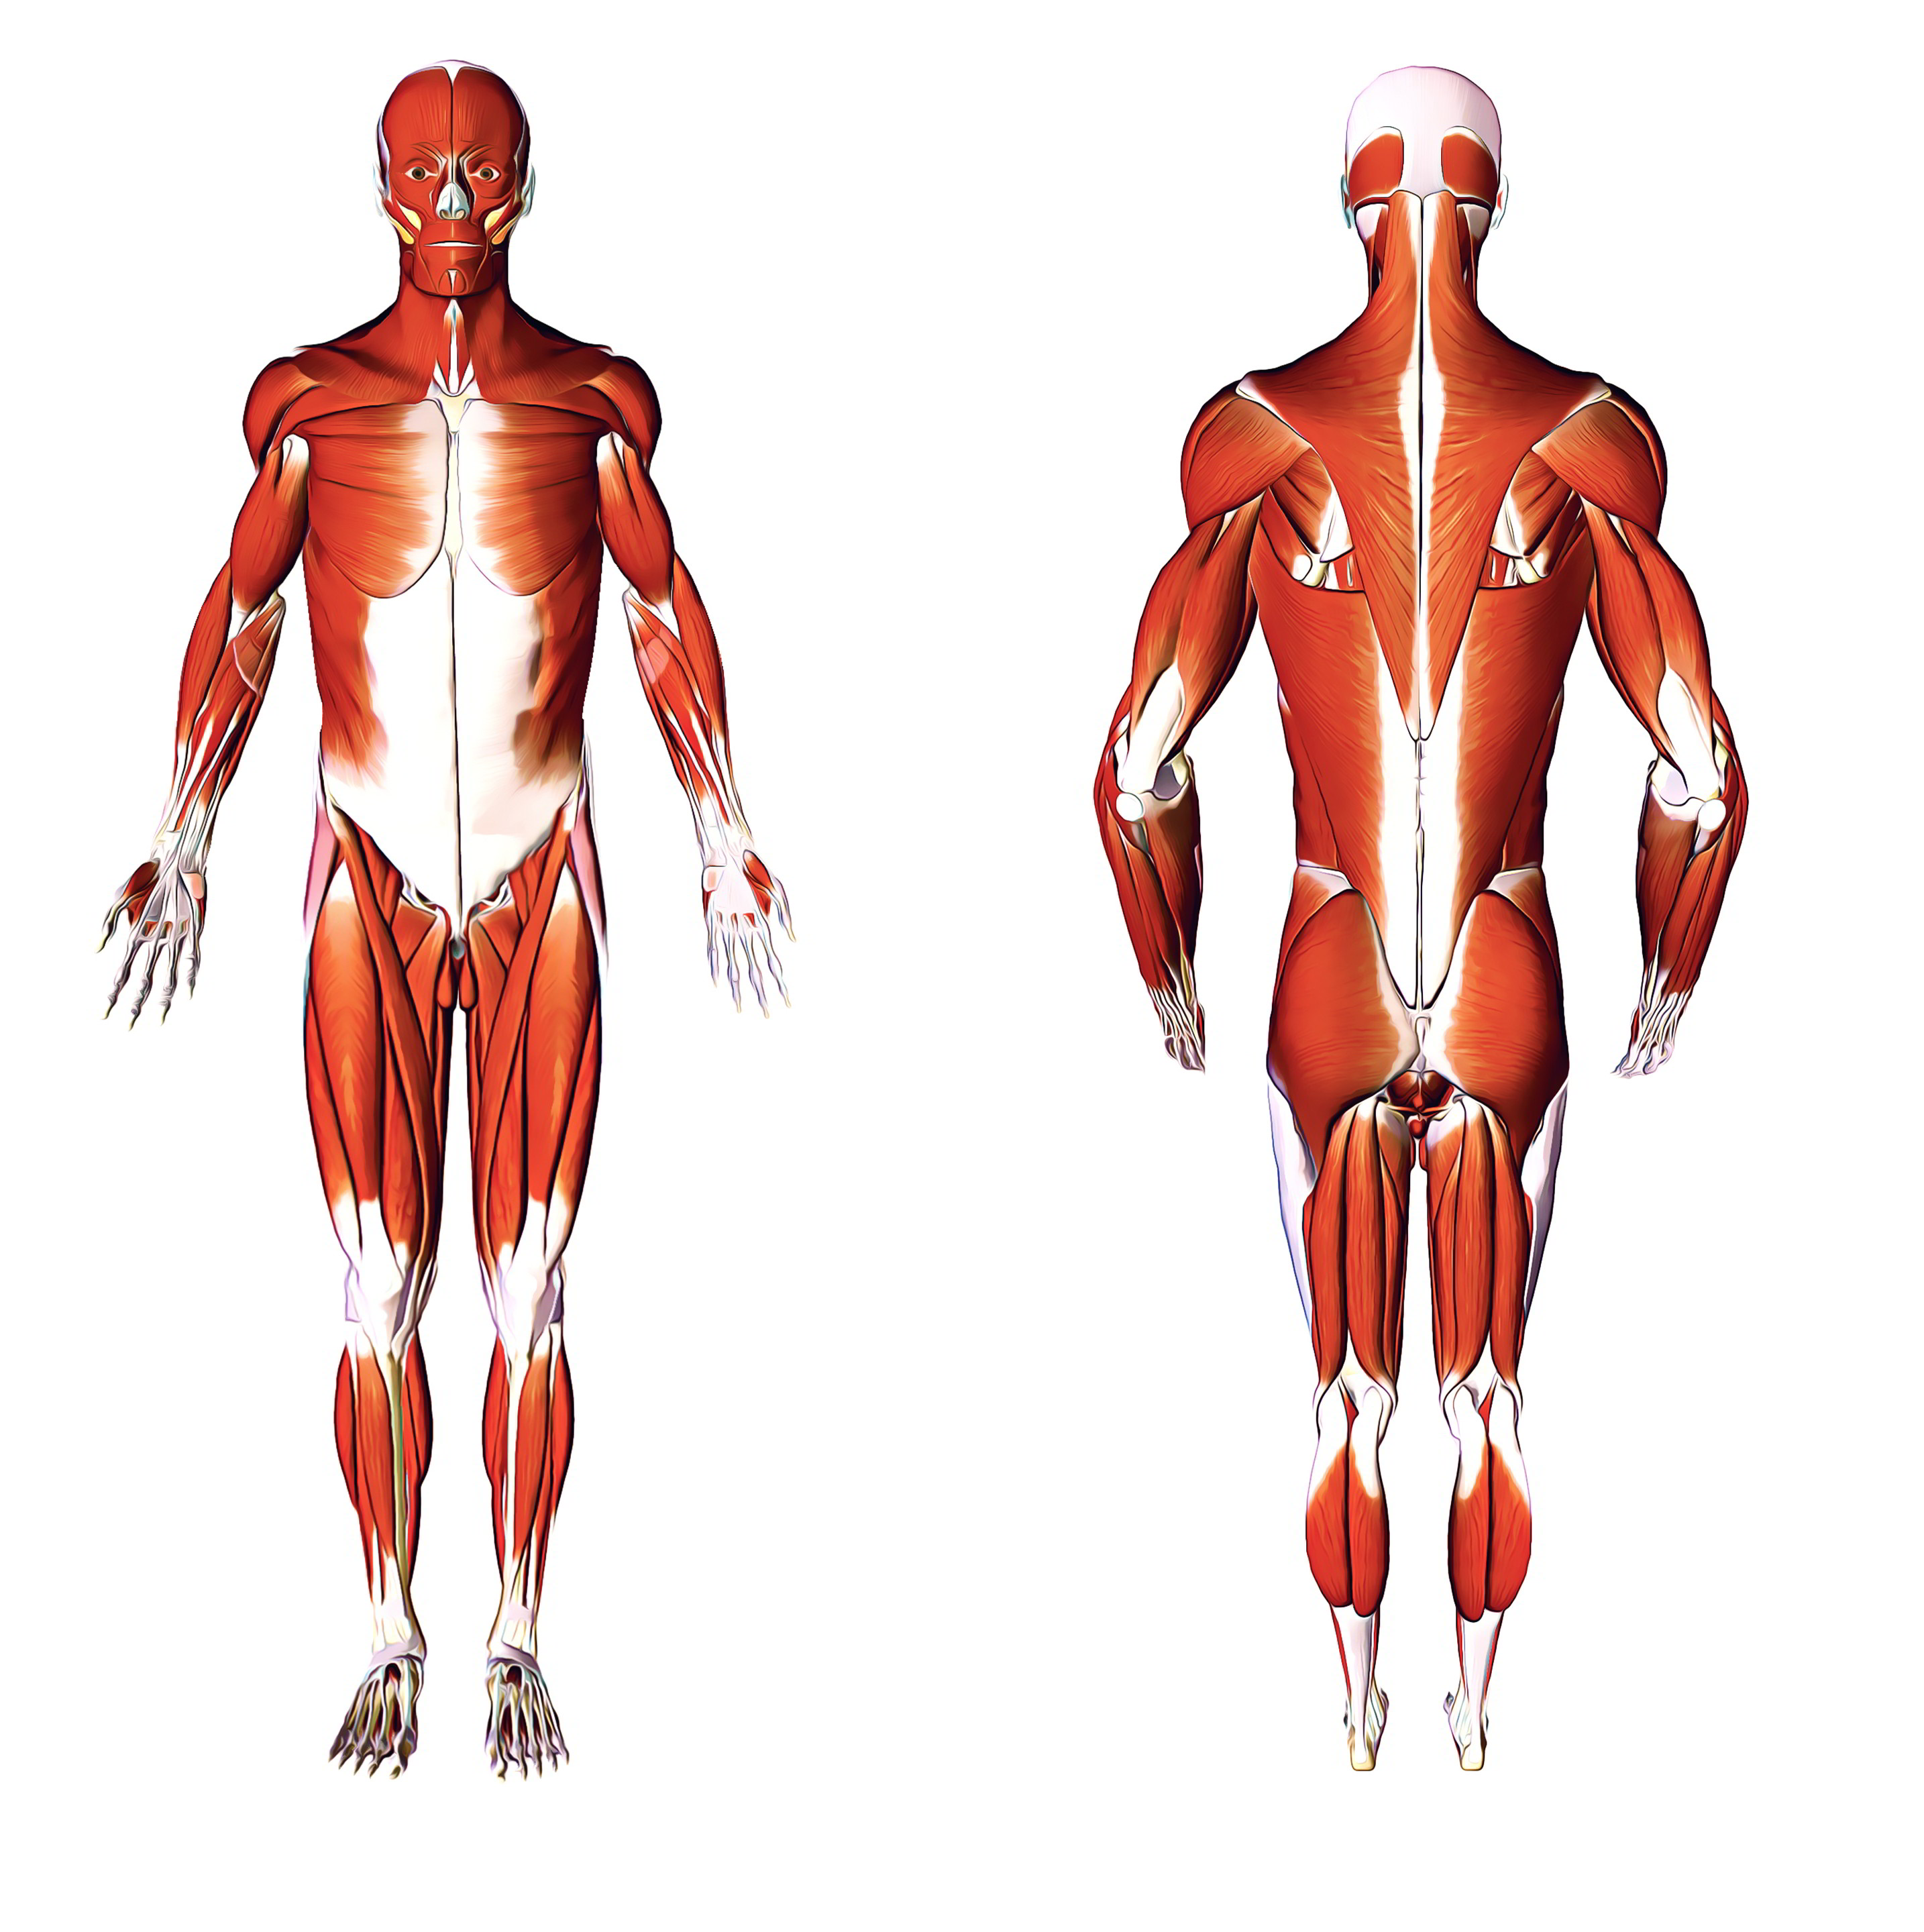 Human Anatomy – Learn Everything About the Human Body!